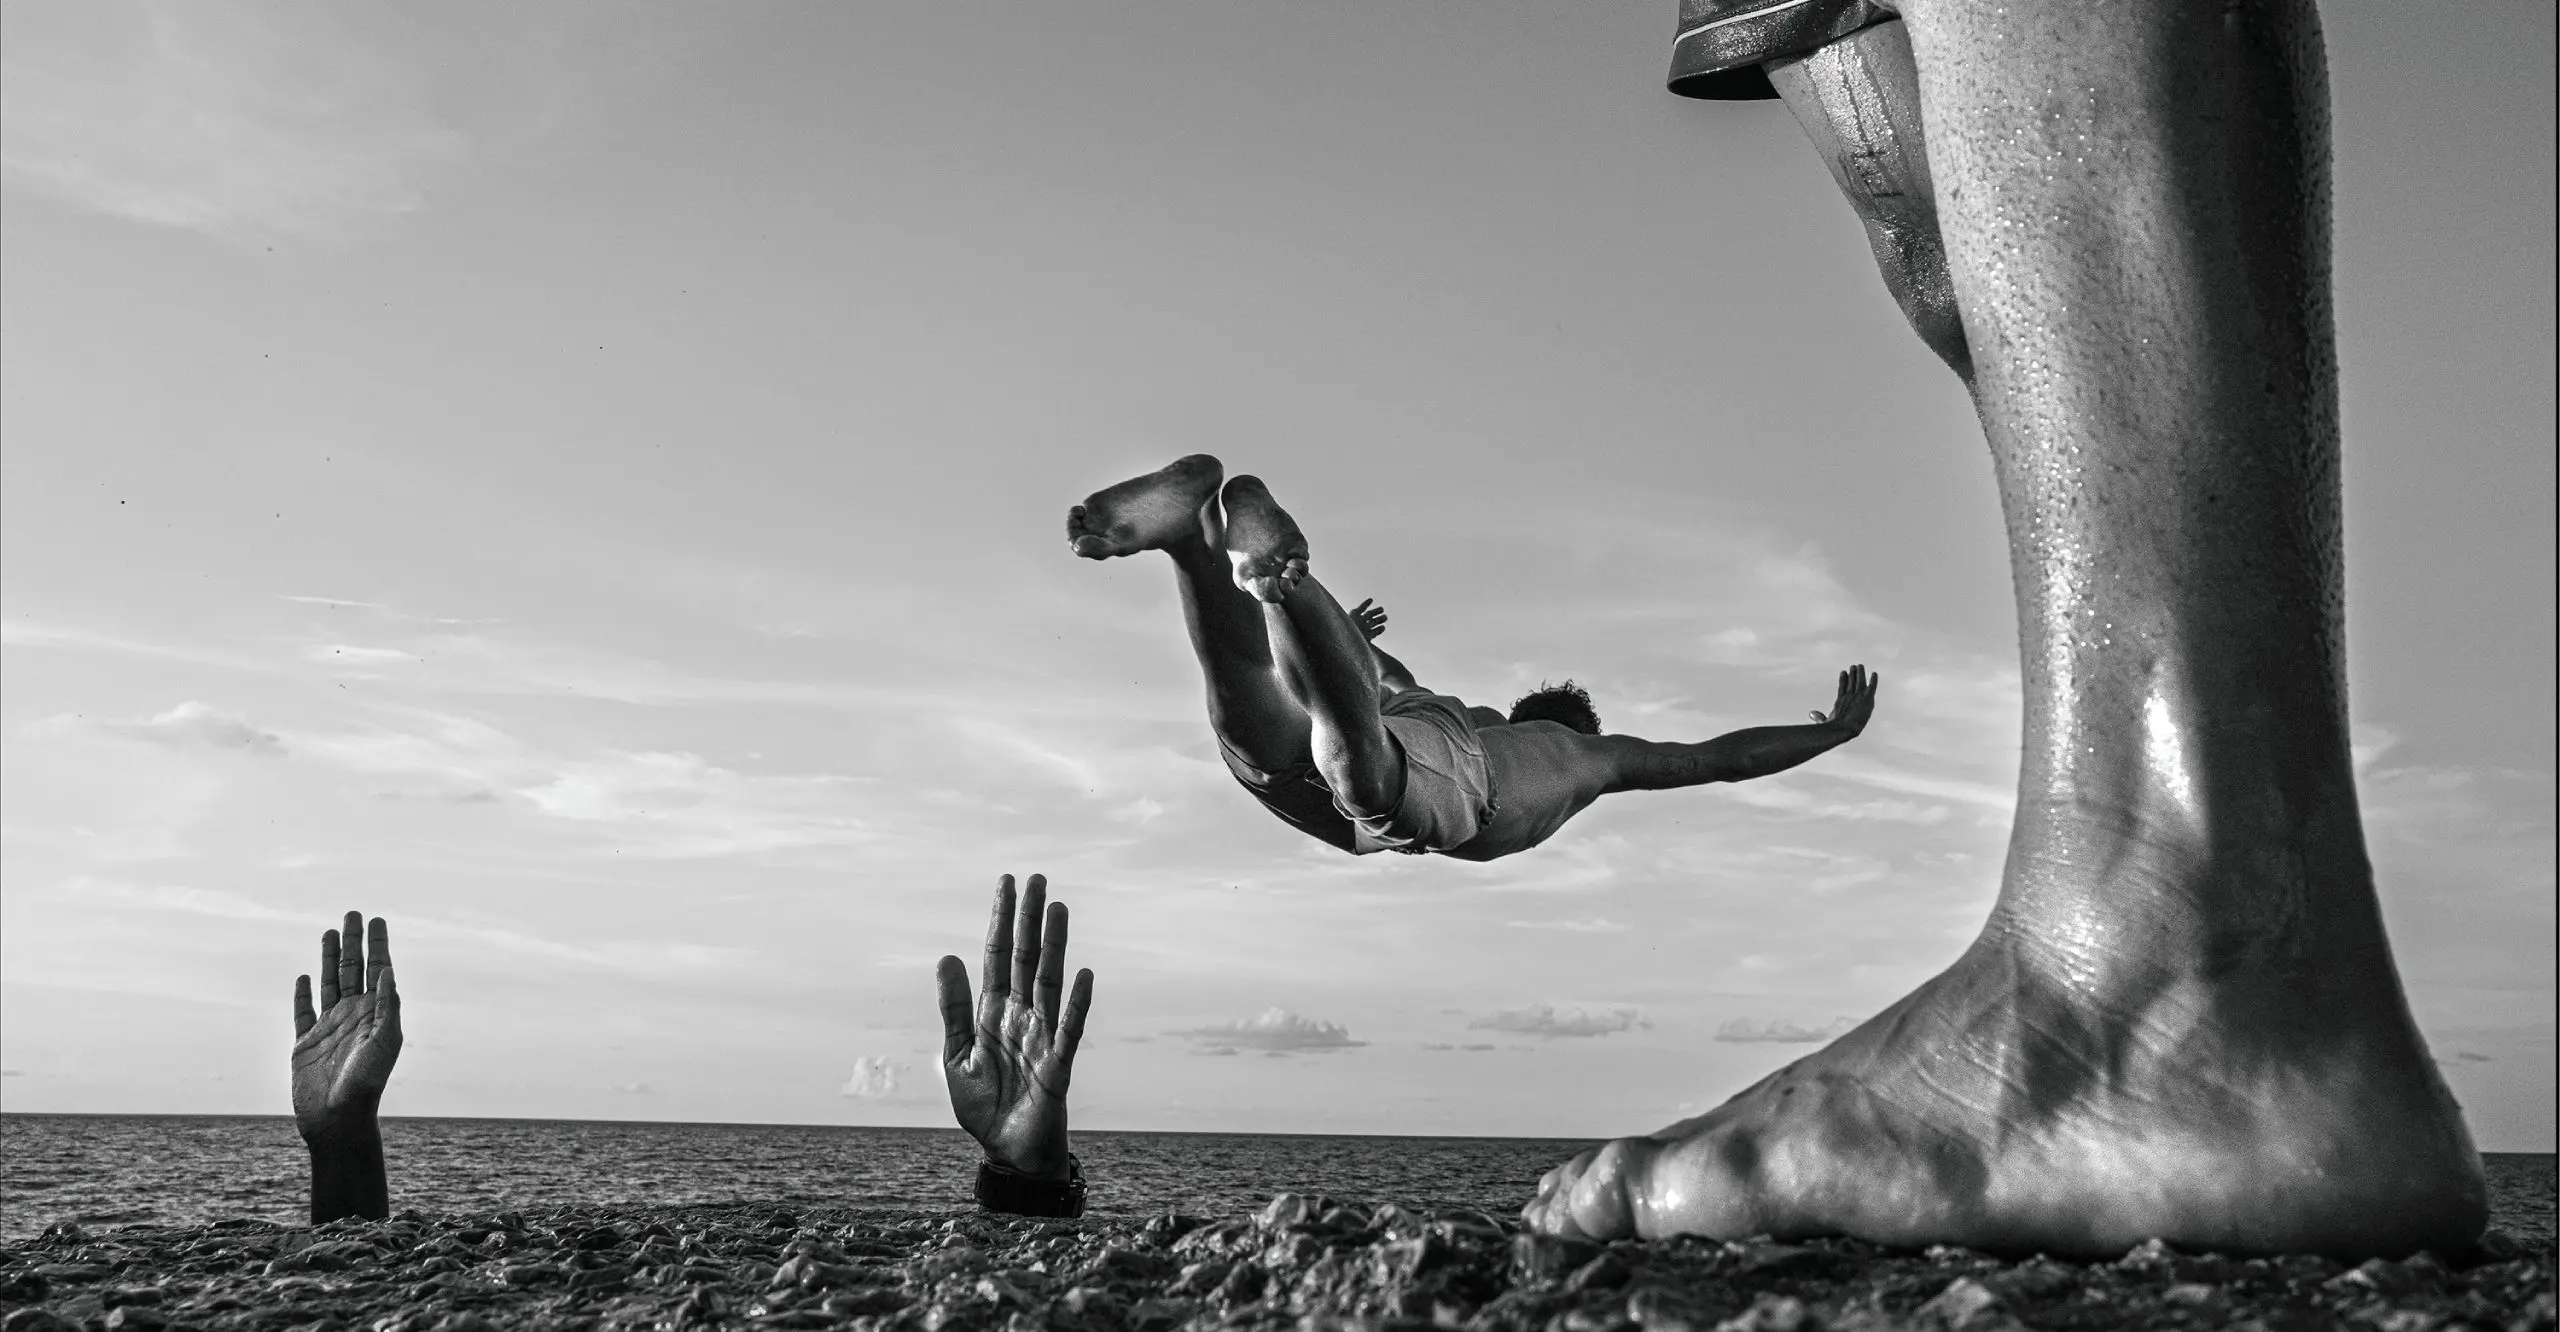 Black and white photograph of a beach scene with a person's leg in the foreground and a person mid air about to dive into the water in the background